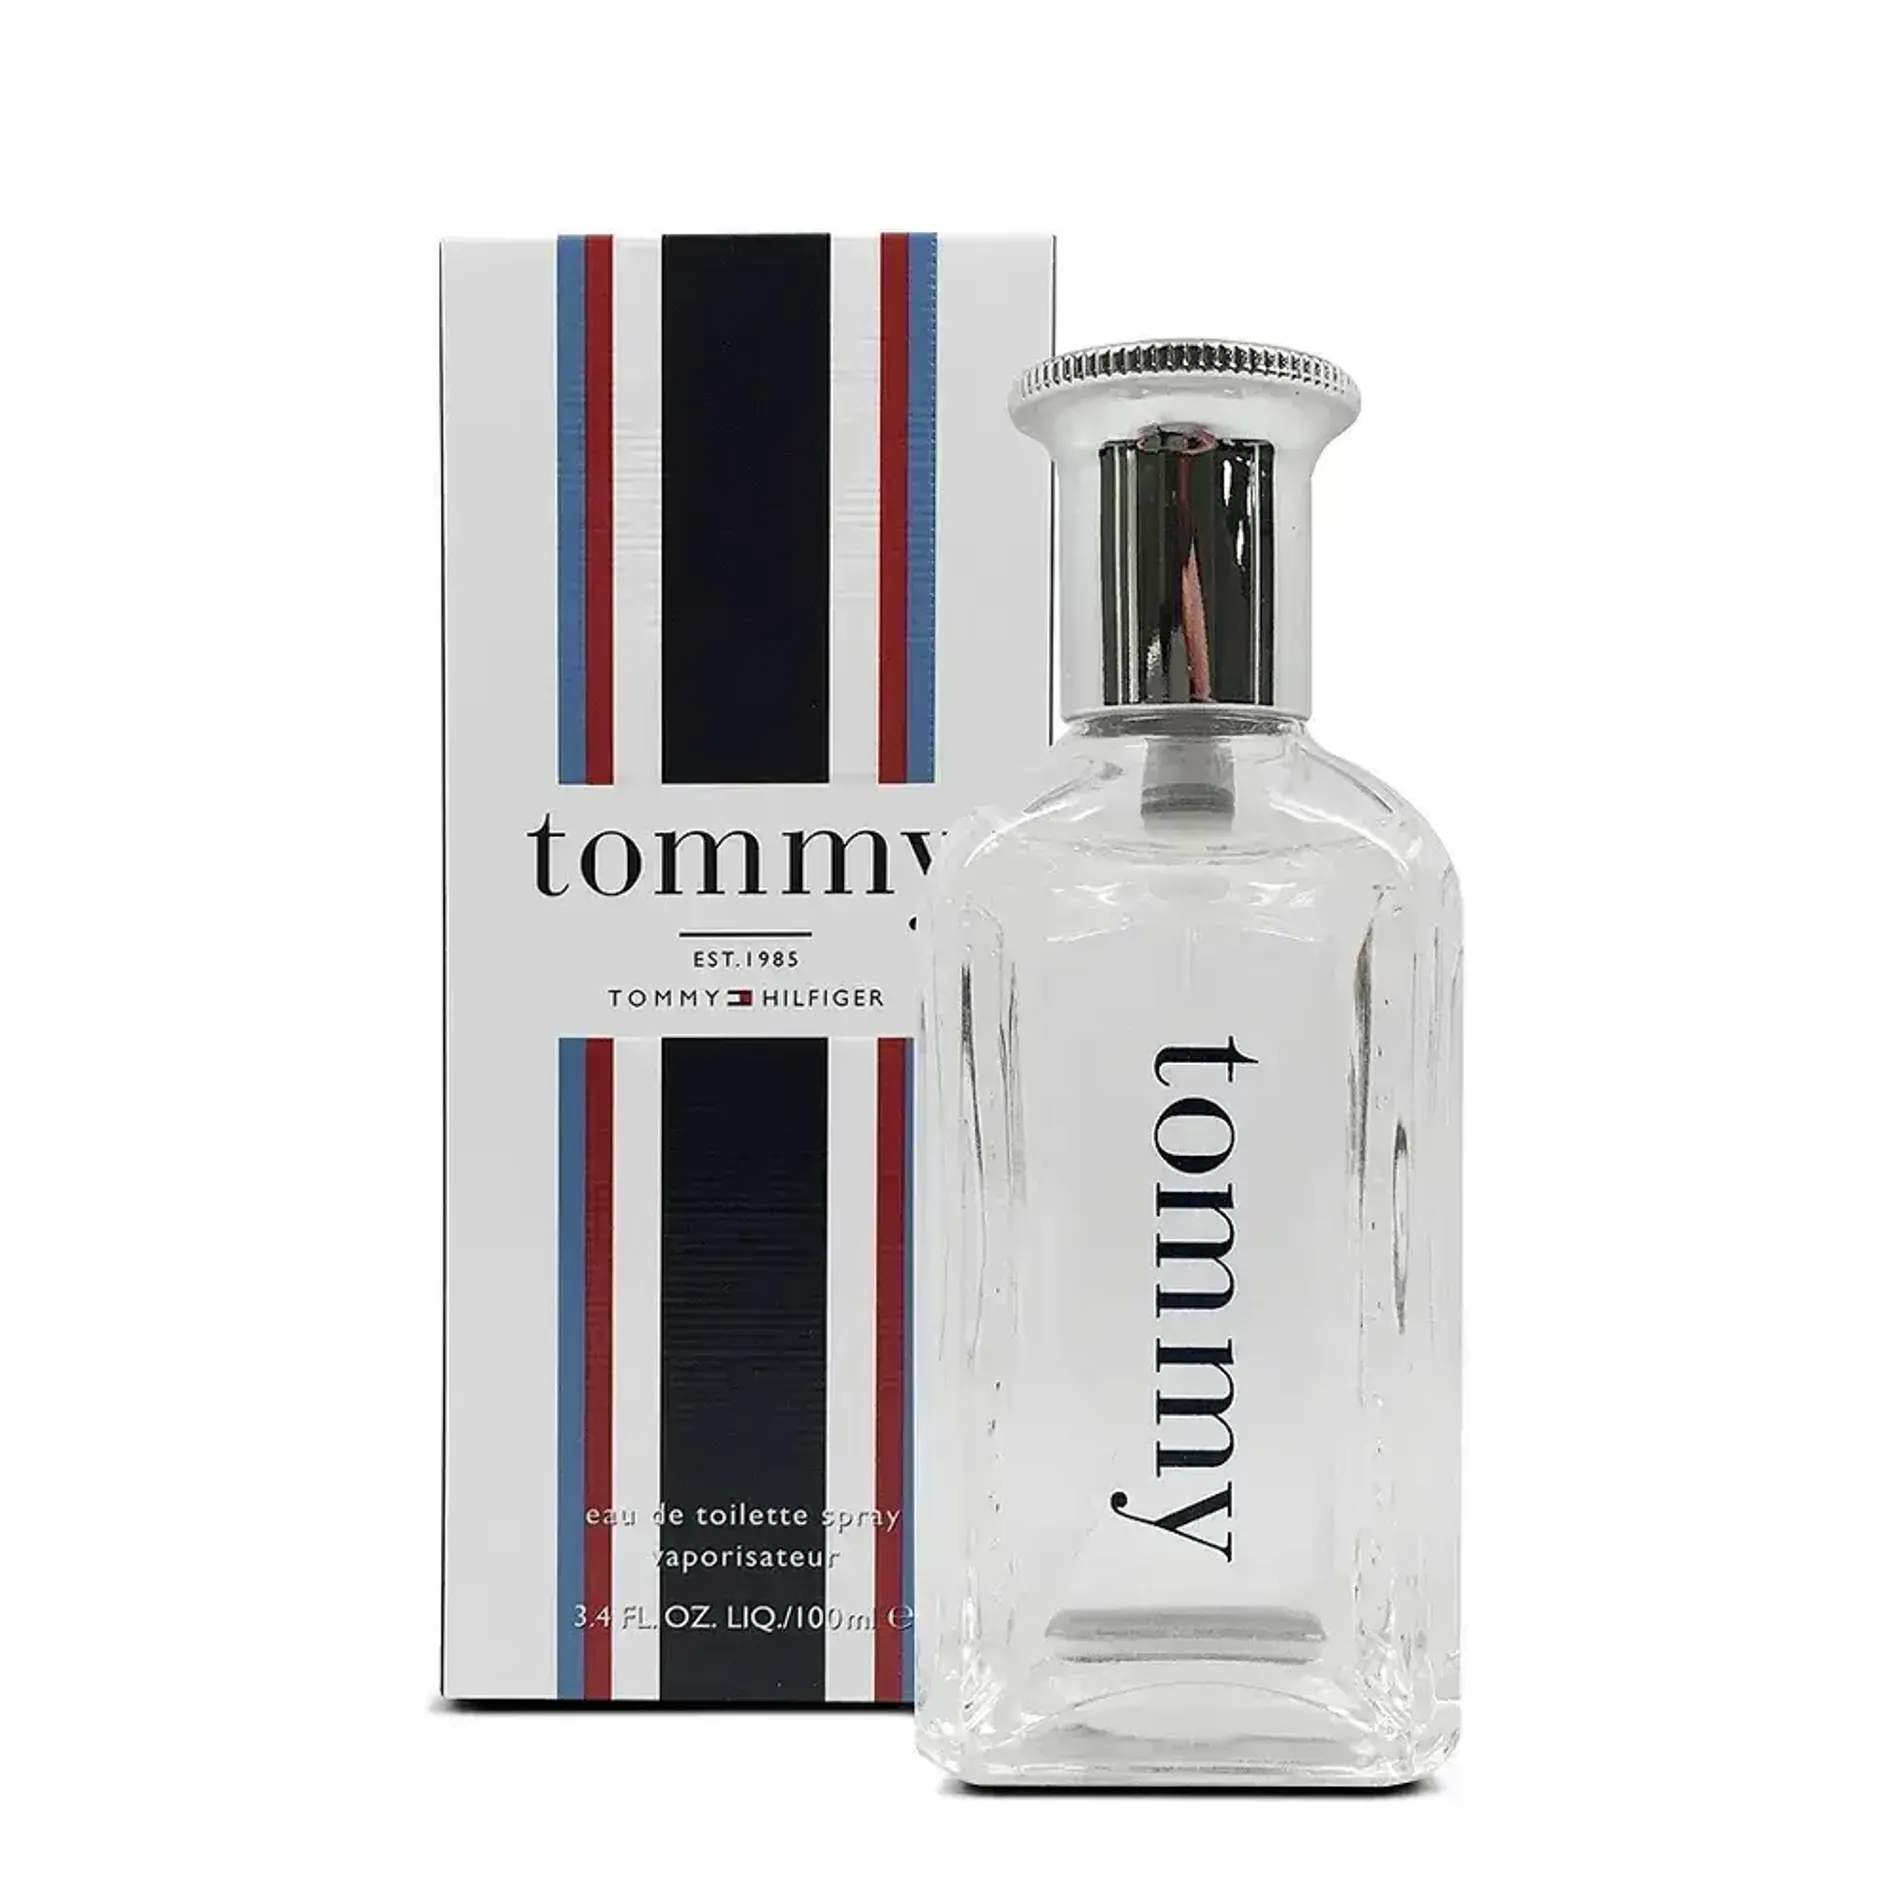 nuoc-hoa-danh-cho-nam-tommy-cologne-spray-edt-30ml-100ml-4